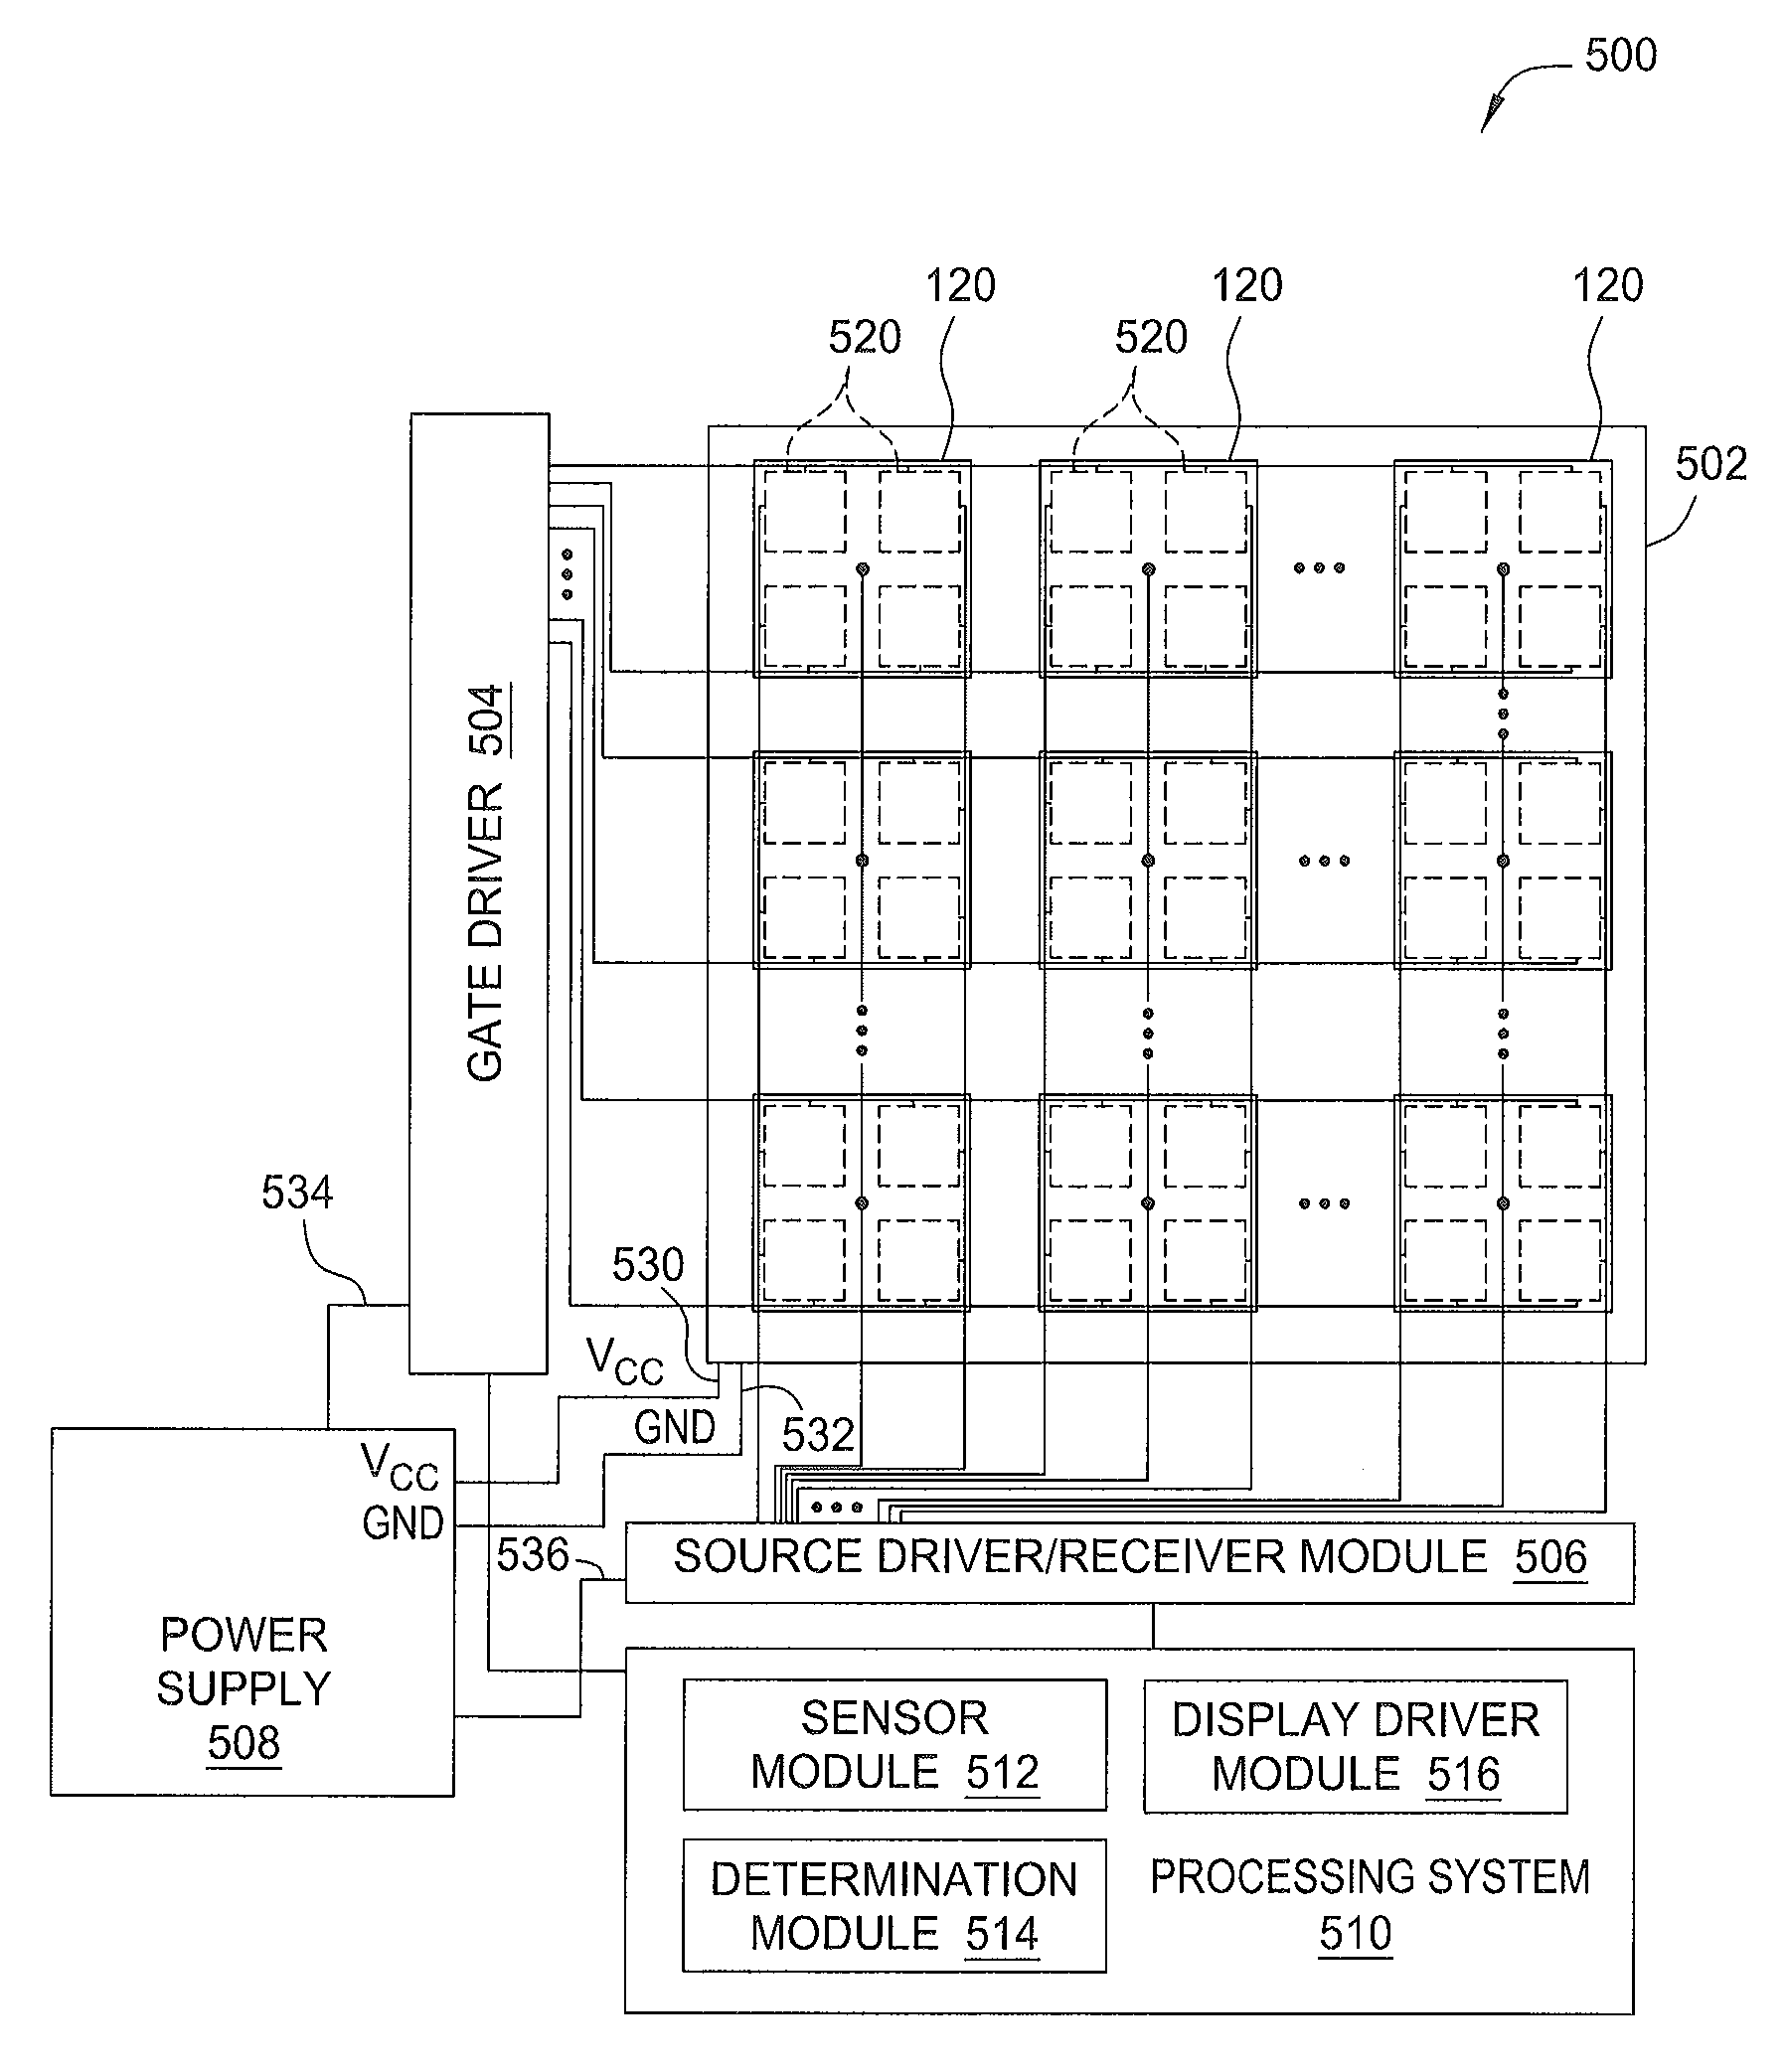 Modulated power supply for reduced parasitic capacitance